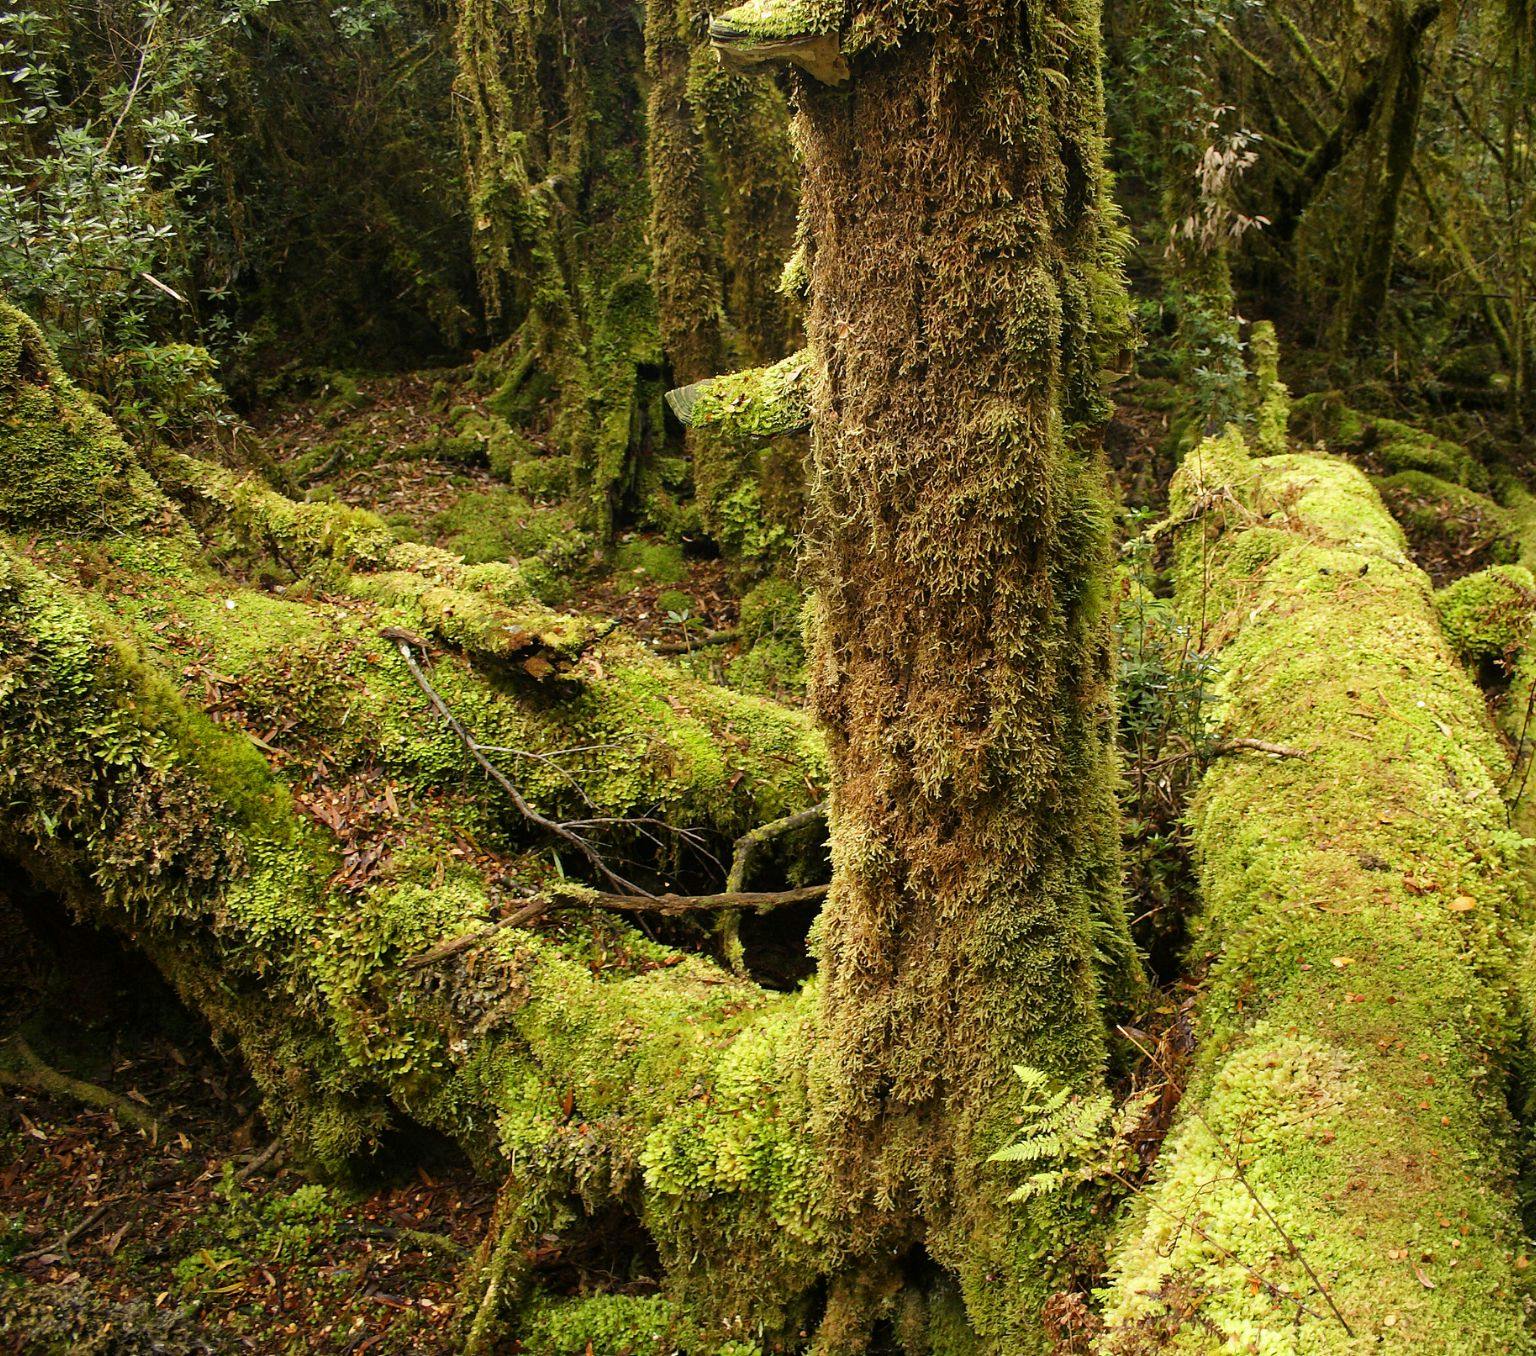 Moss growing on trees in old forest in Tasmania